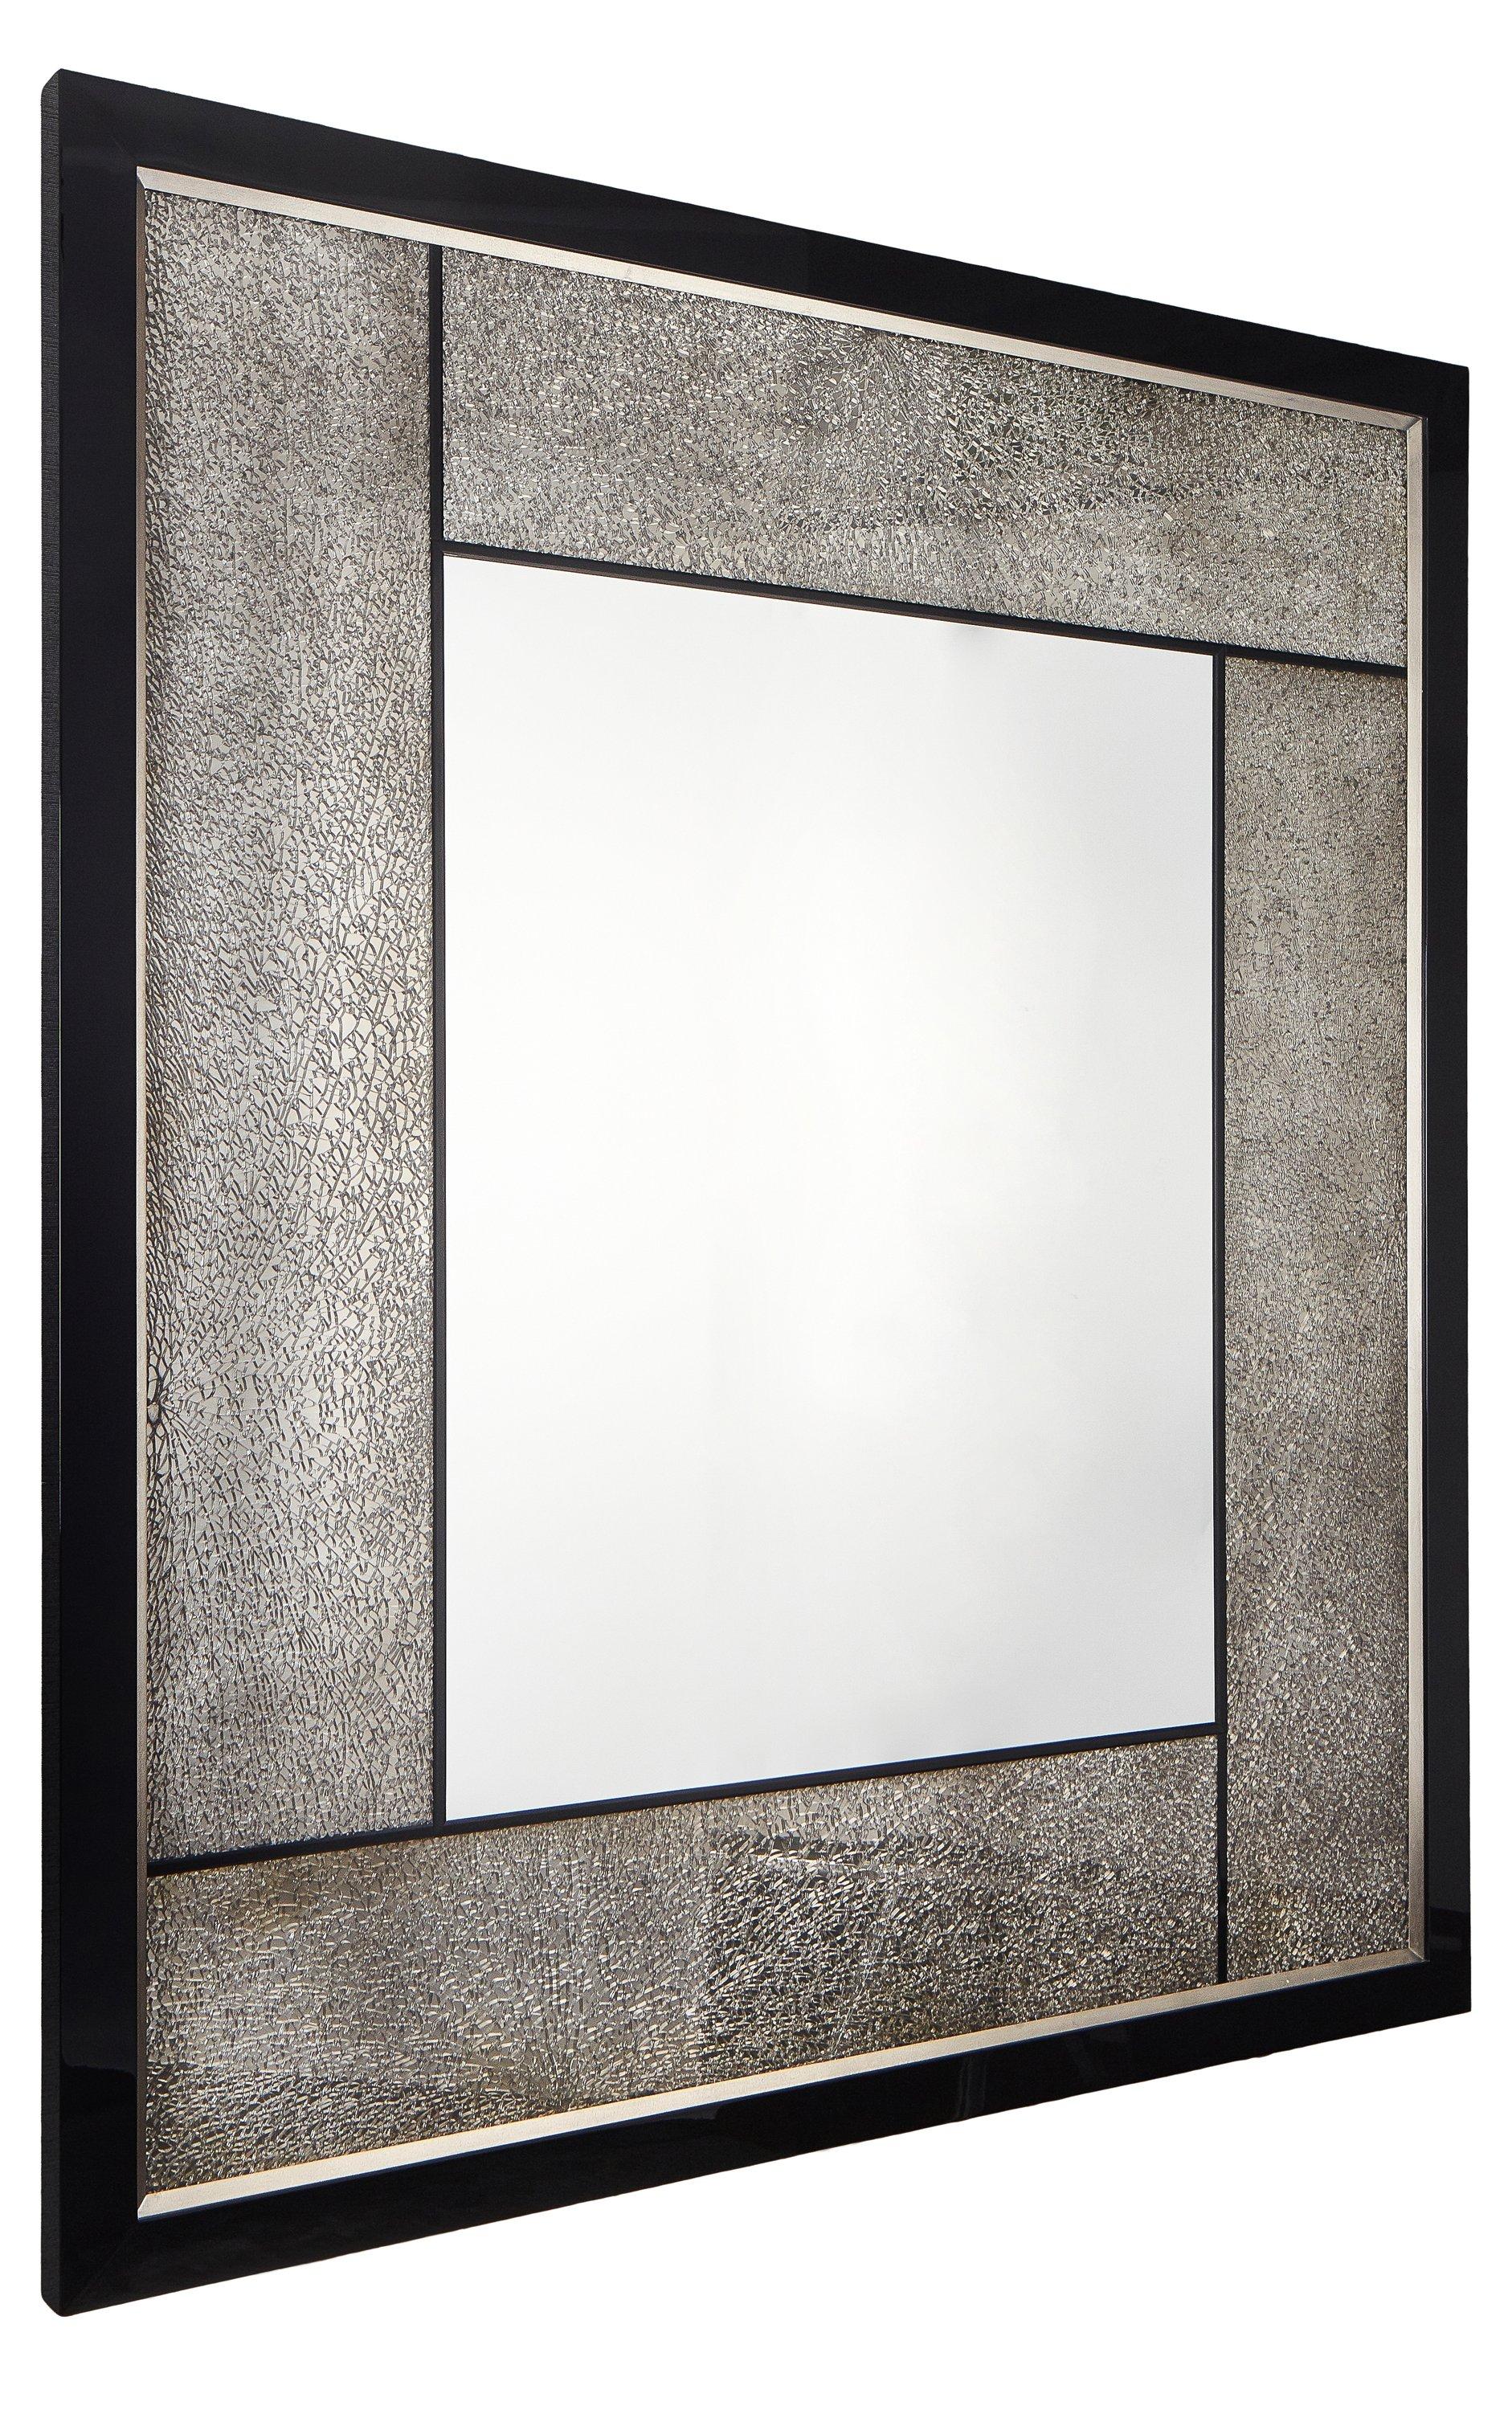 Big Mirror with Cracked Glass and Piano Black/Silver Leaf Frame, Customizable (Moderne) im Angebot